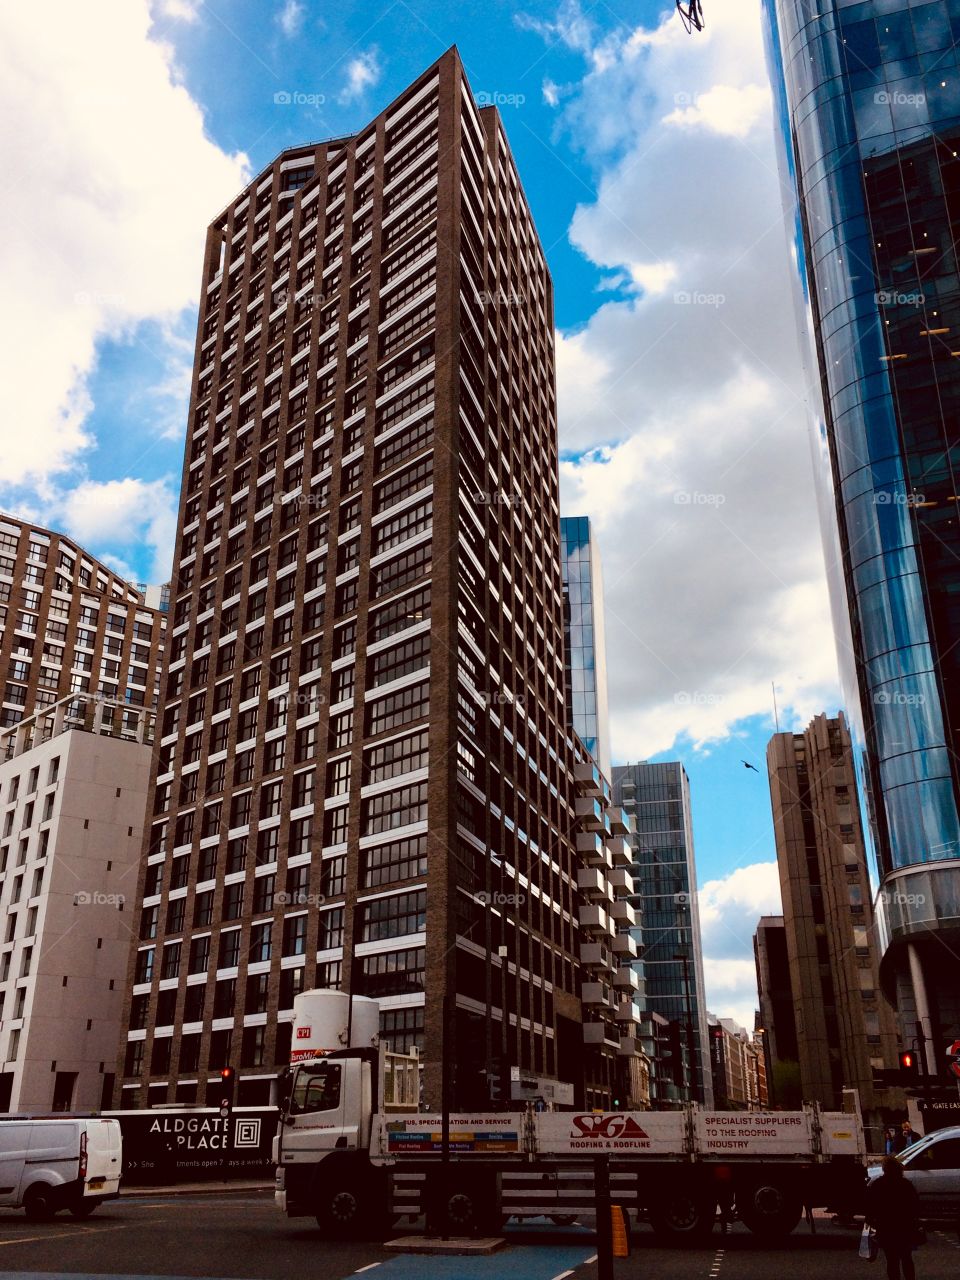 London with the many high rise building. It looks stunning and incredible. All the windows reflecting the blue cloudy sky. Architecture modern and urban style mixt with the traditional buildings. The next trip for you